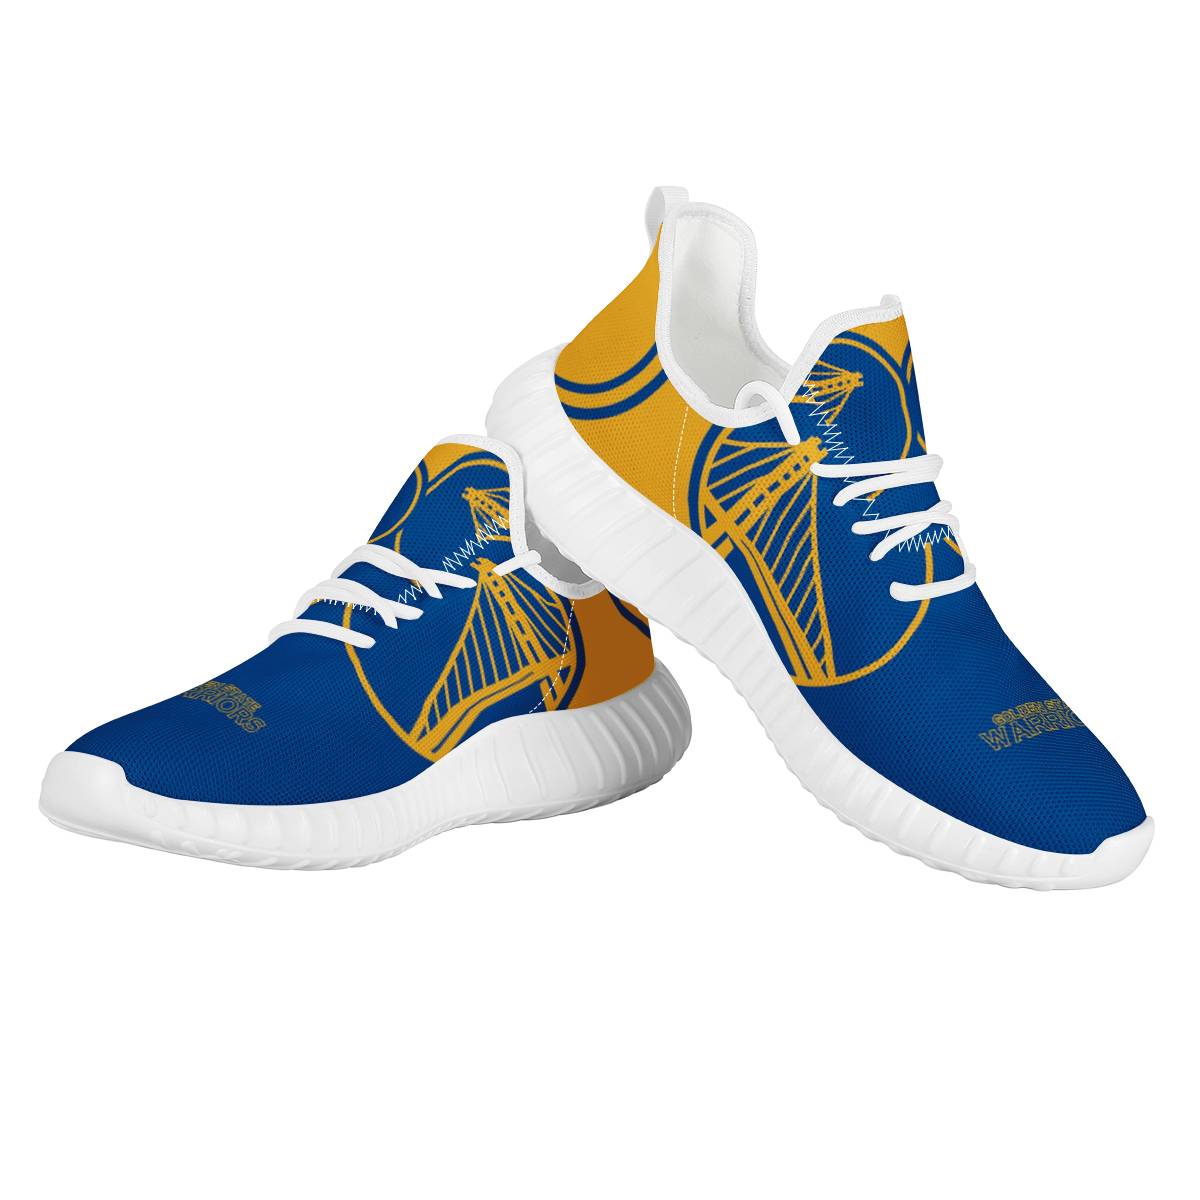 Women's Golden State Warriors Mesh Knit Sneakers/Shoes 003